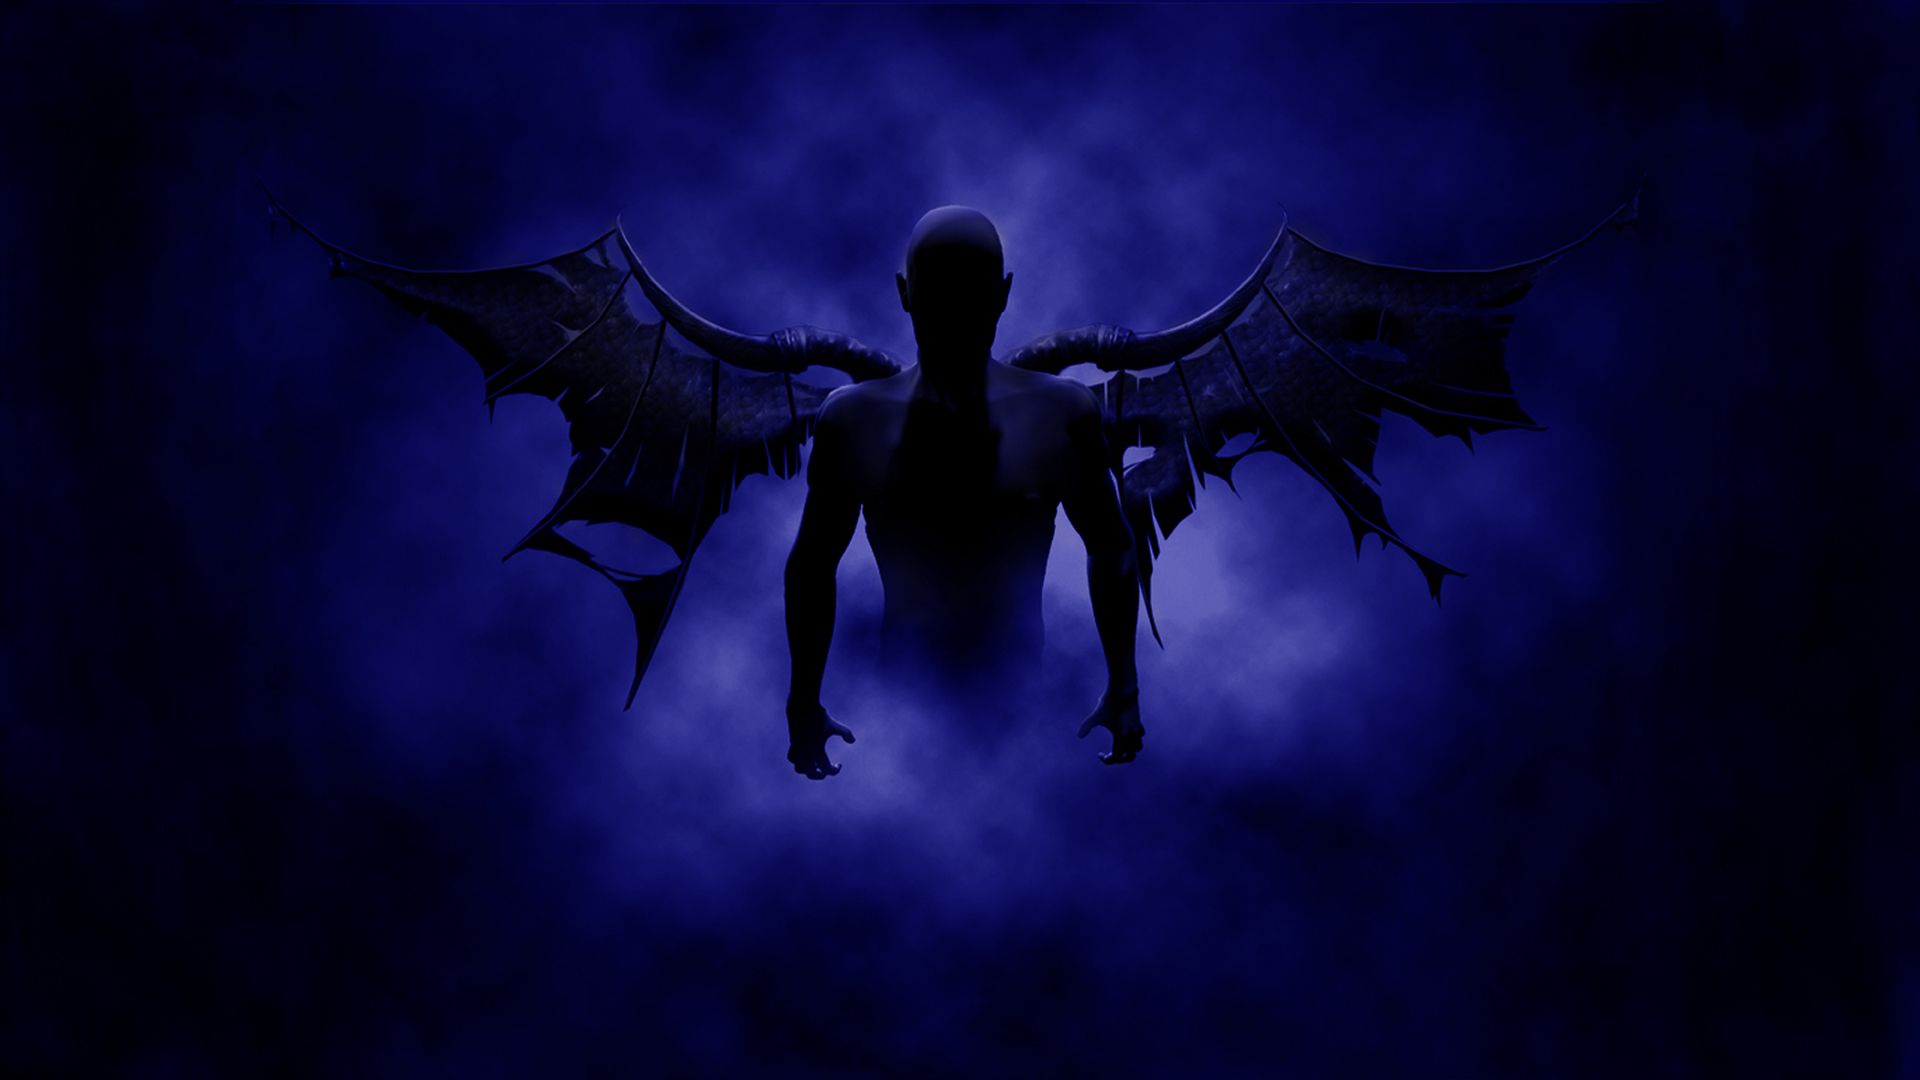 Blue Face Of Cartoon Demon With Black Background, Best Profile